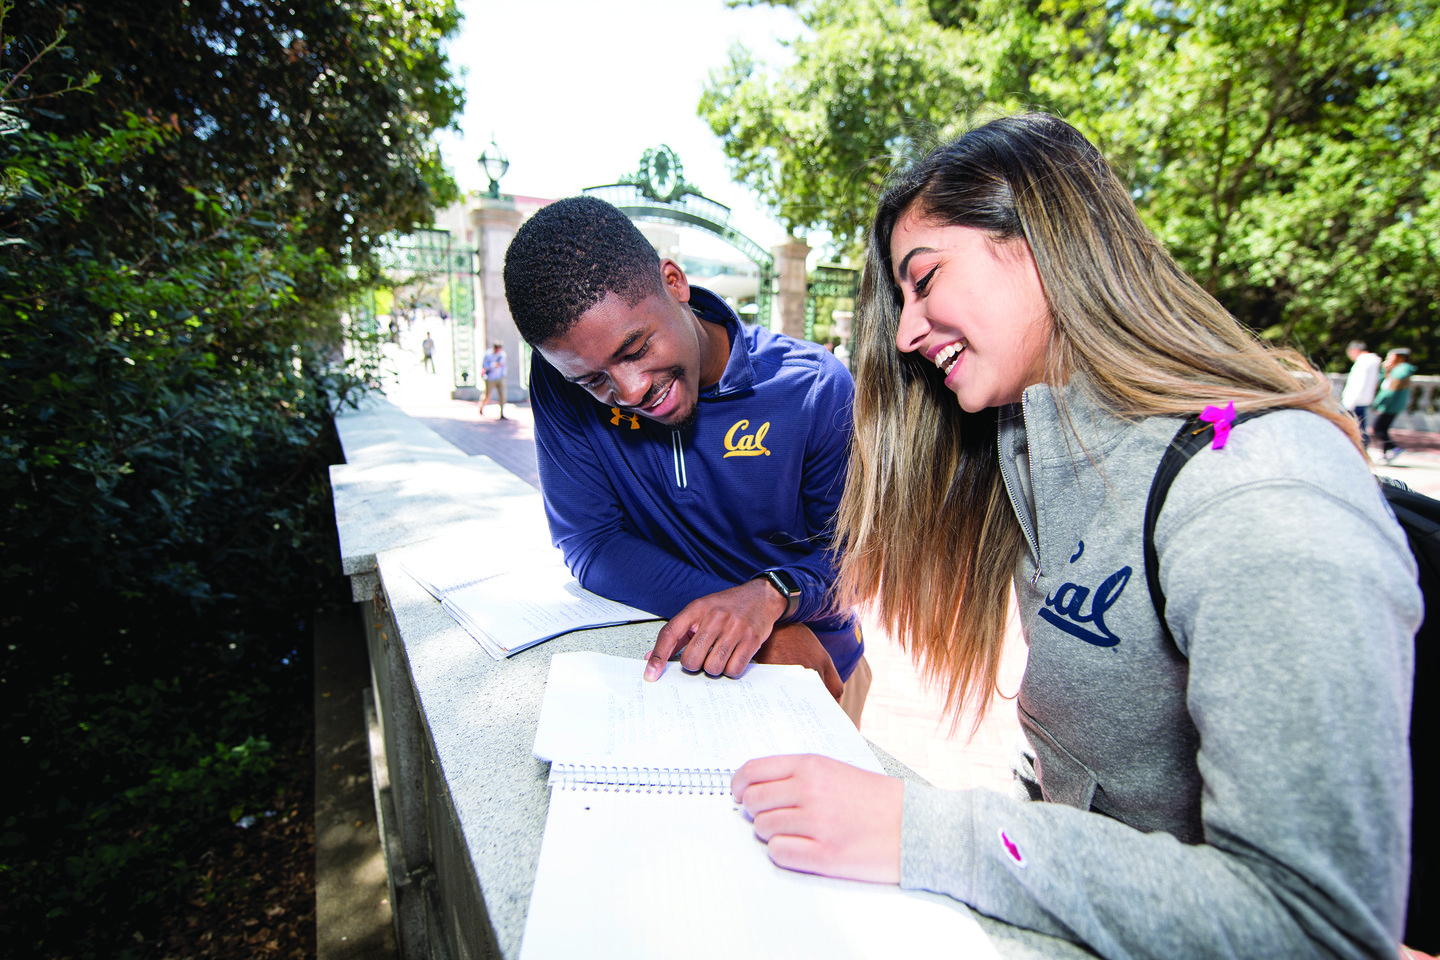 Color photo of two undergrads looking at assignments and smiling, Sather Gate visible in the background